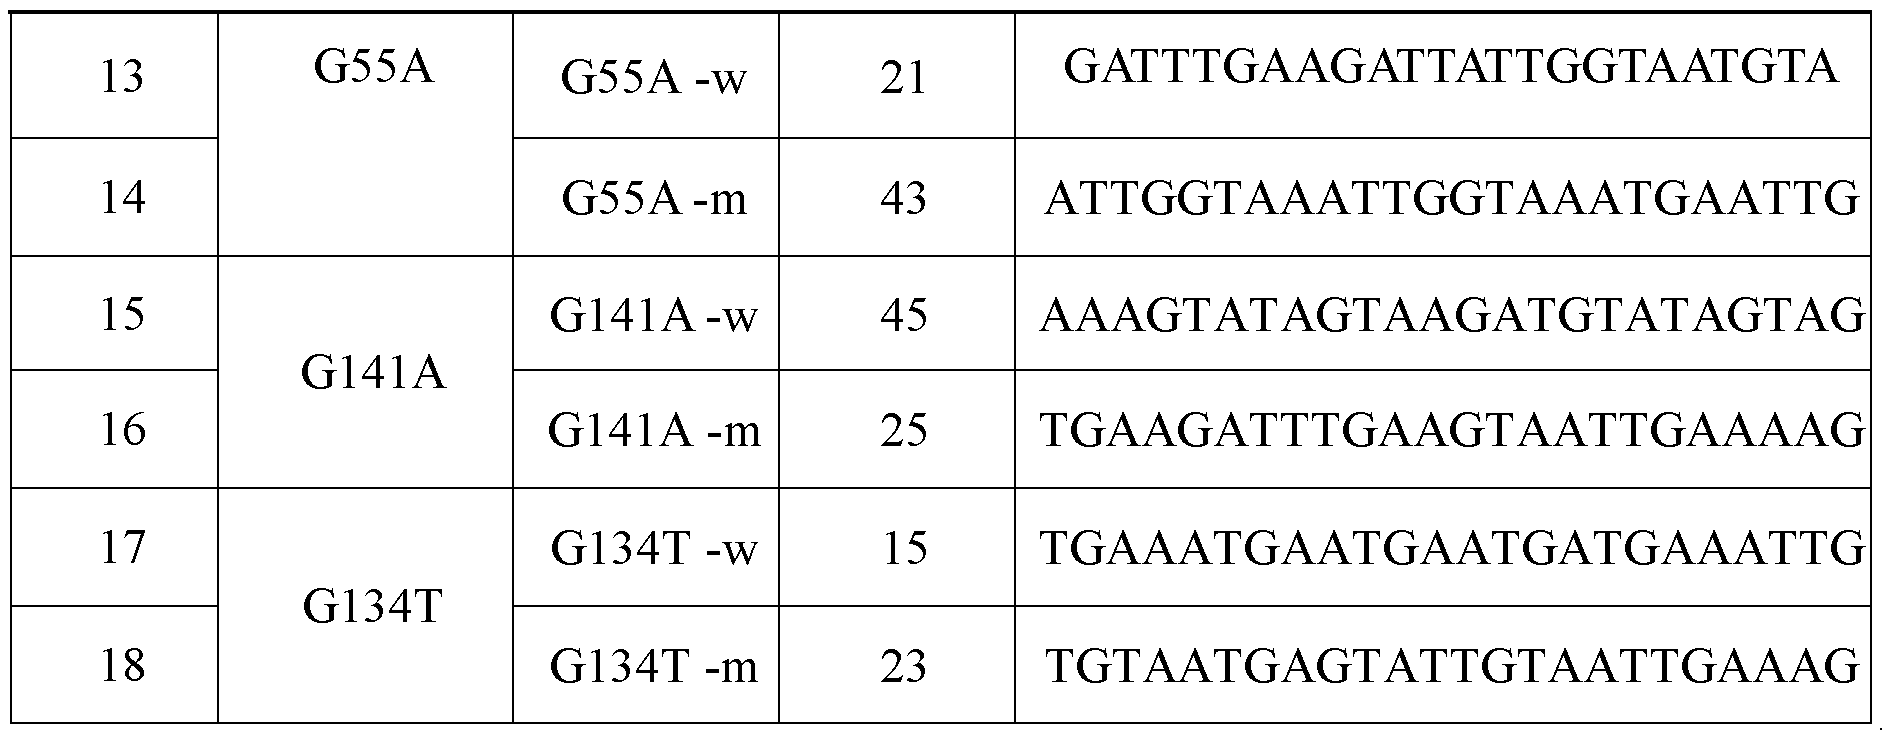 Specific primer and liquid chip for detecting polymorphism of DPYD (dihydropyrimidine dehydrogenase) gene